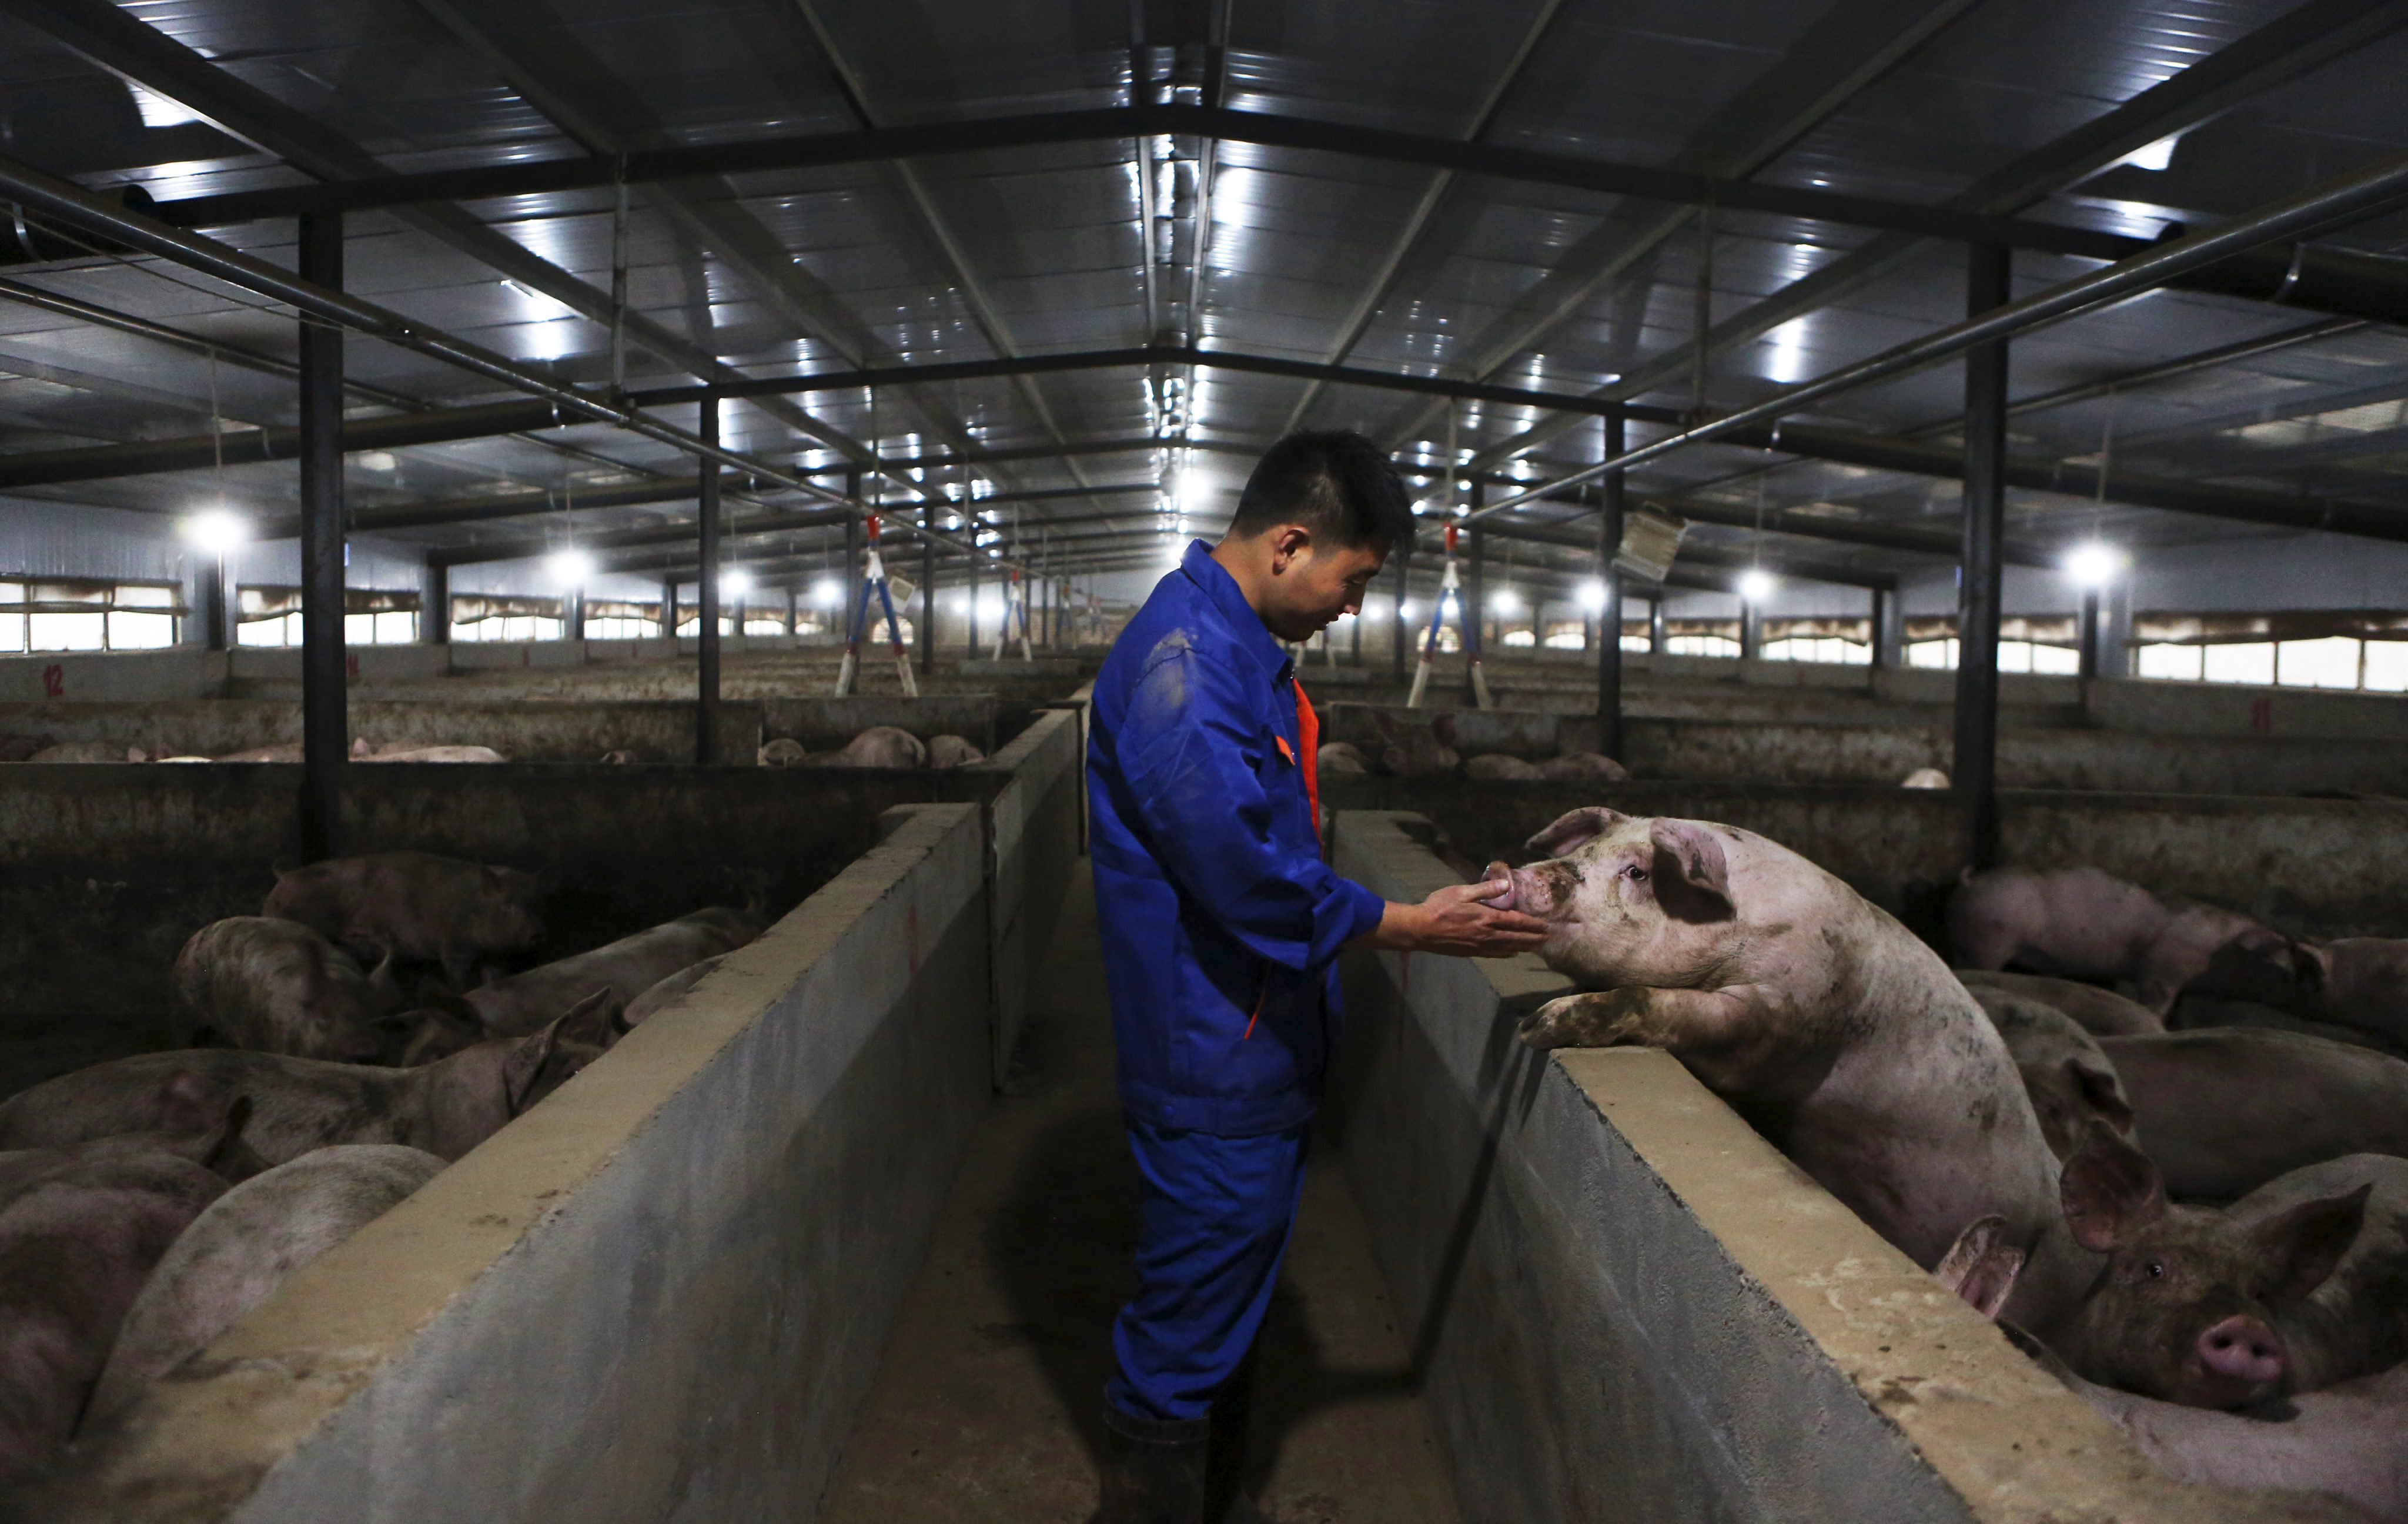 A staff member checks a pig’s condition at a farm in Zhongjiang county, southwest China’s Sichuan province, on November 28, 2019. Photo: Xinhua